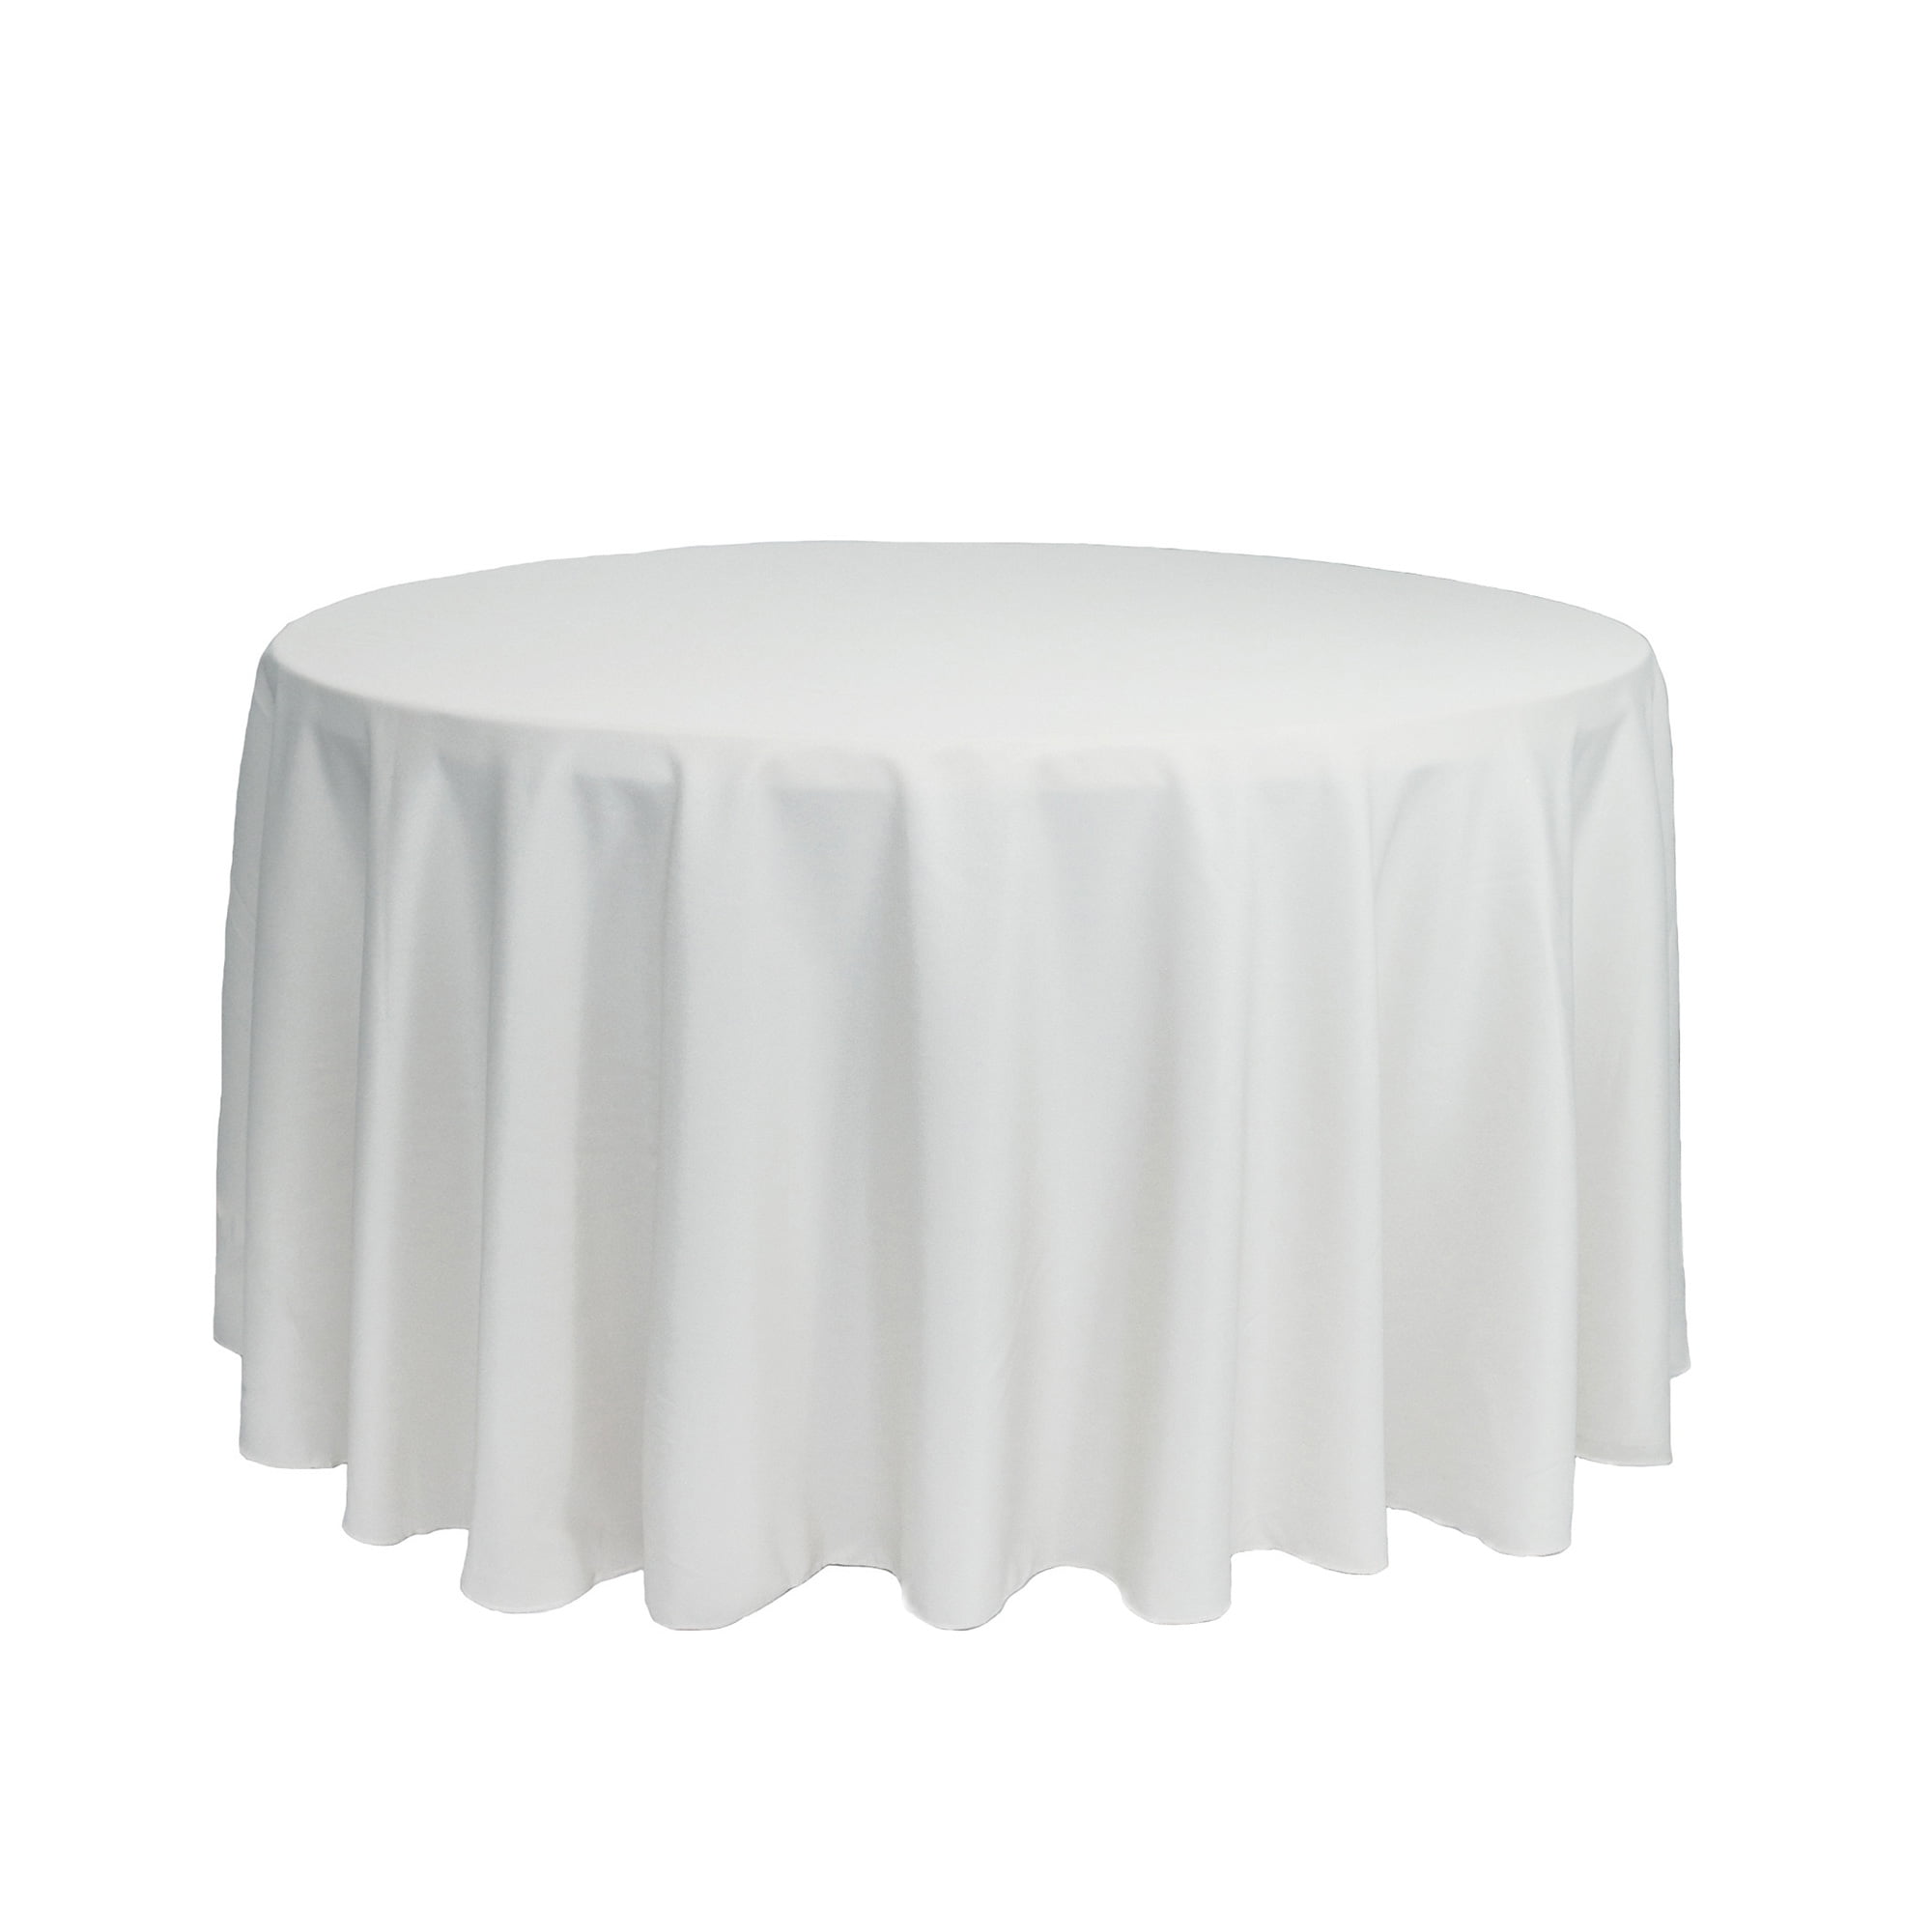 Your Chair Covers 108 Inch Round, 120 Round White Tablecloths